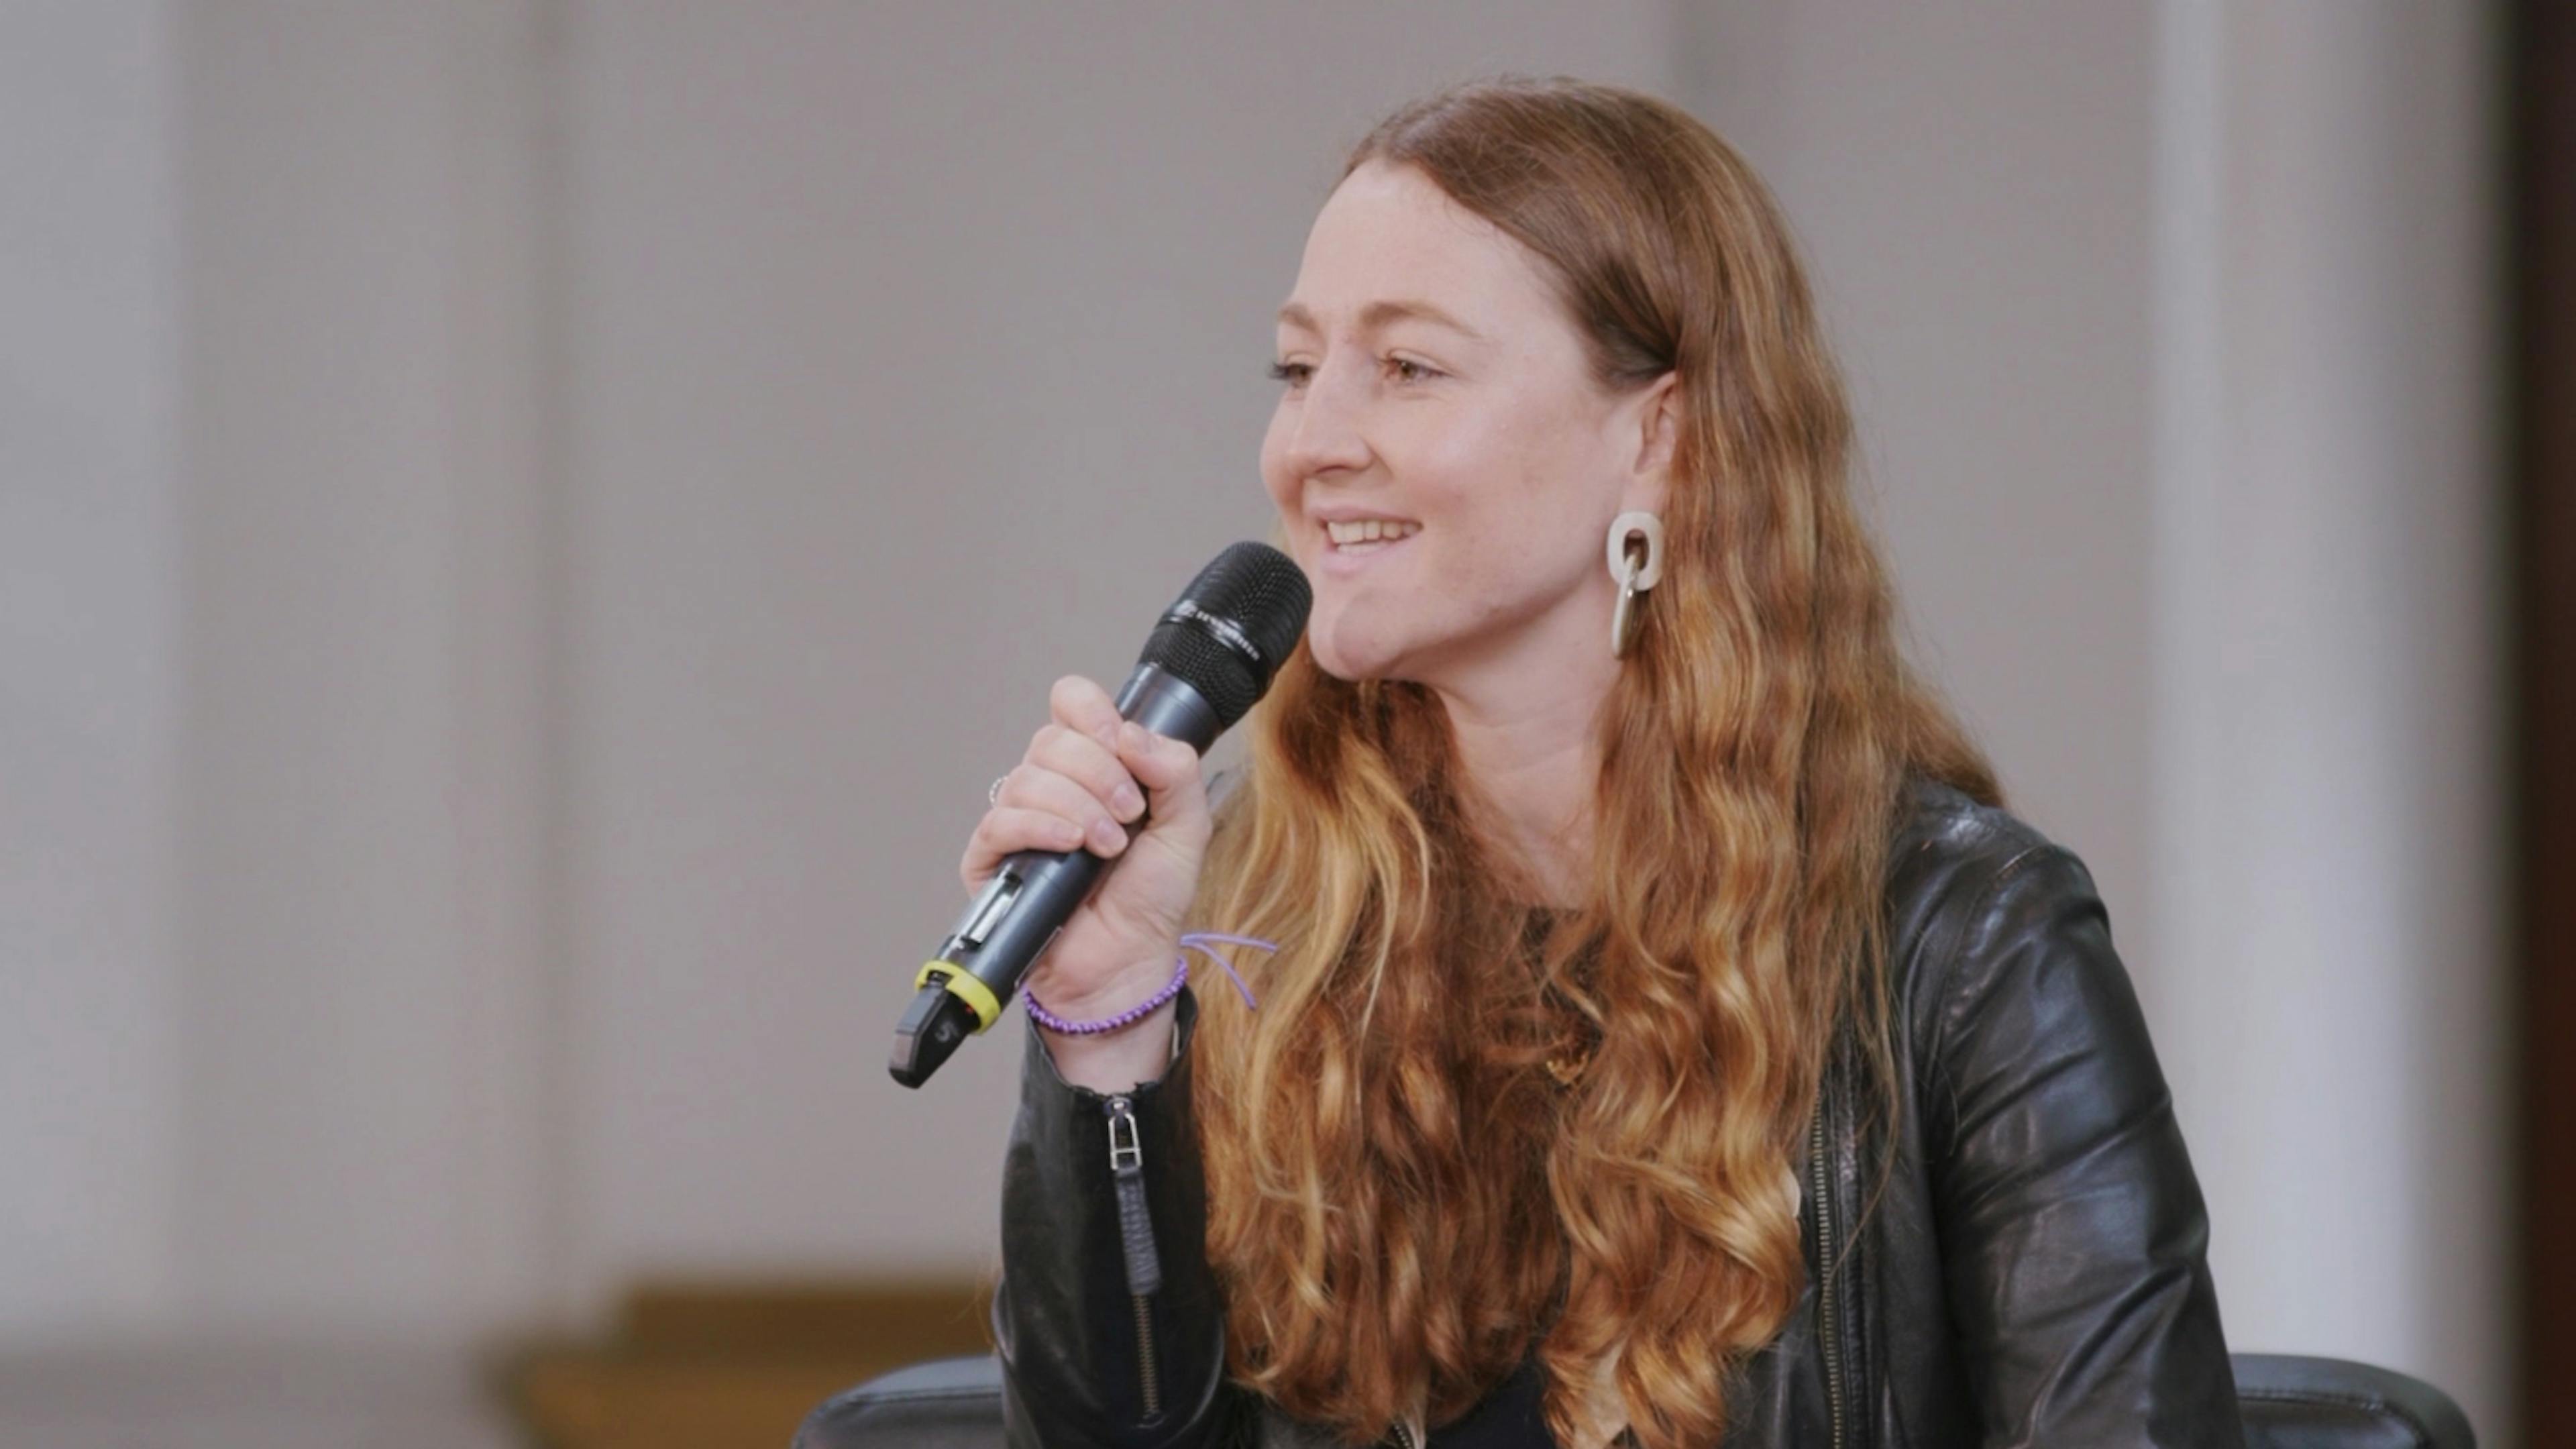 A screen capture of Caragh Bennet's interview. She is facing the audience and speaking into a microphone.